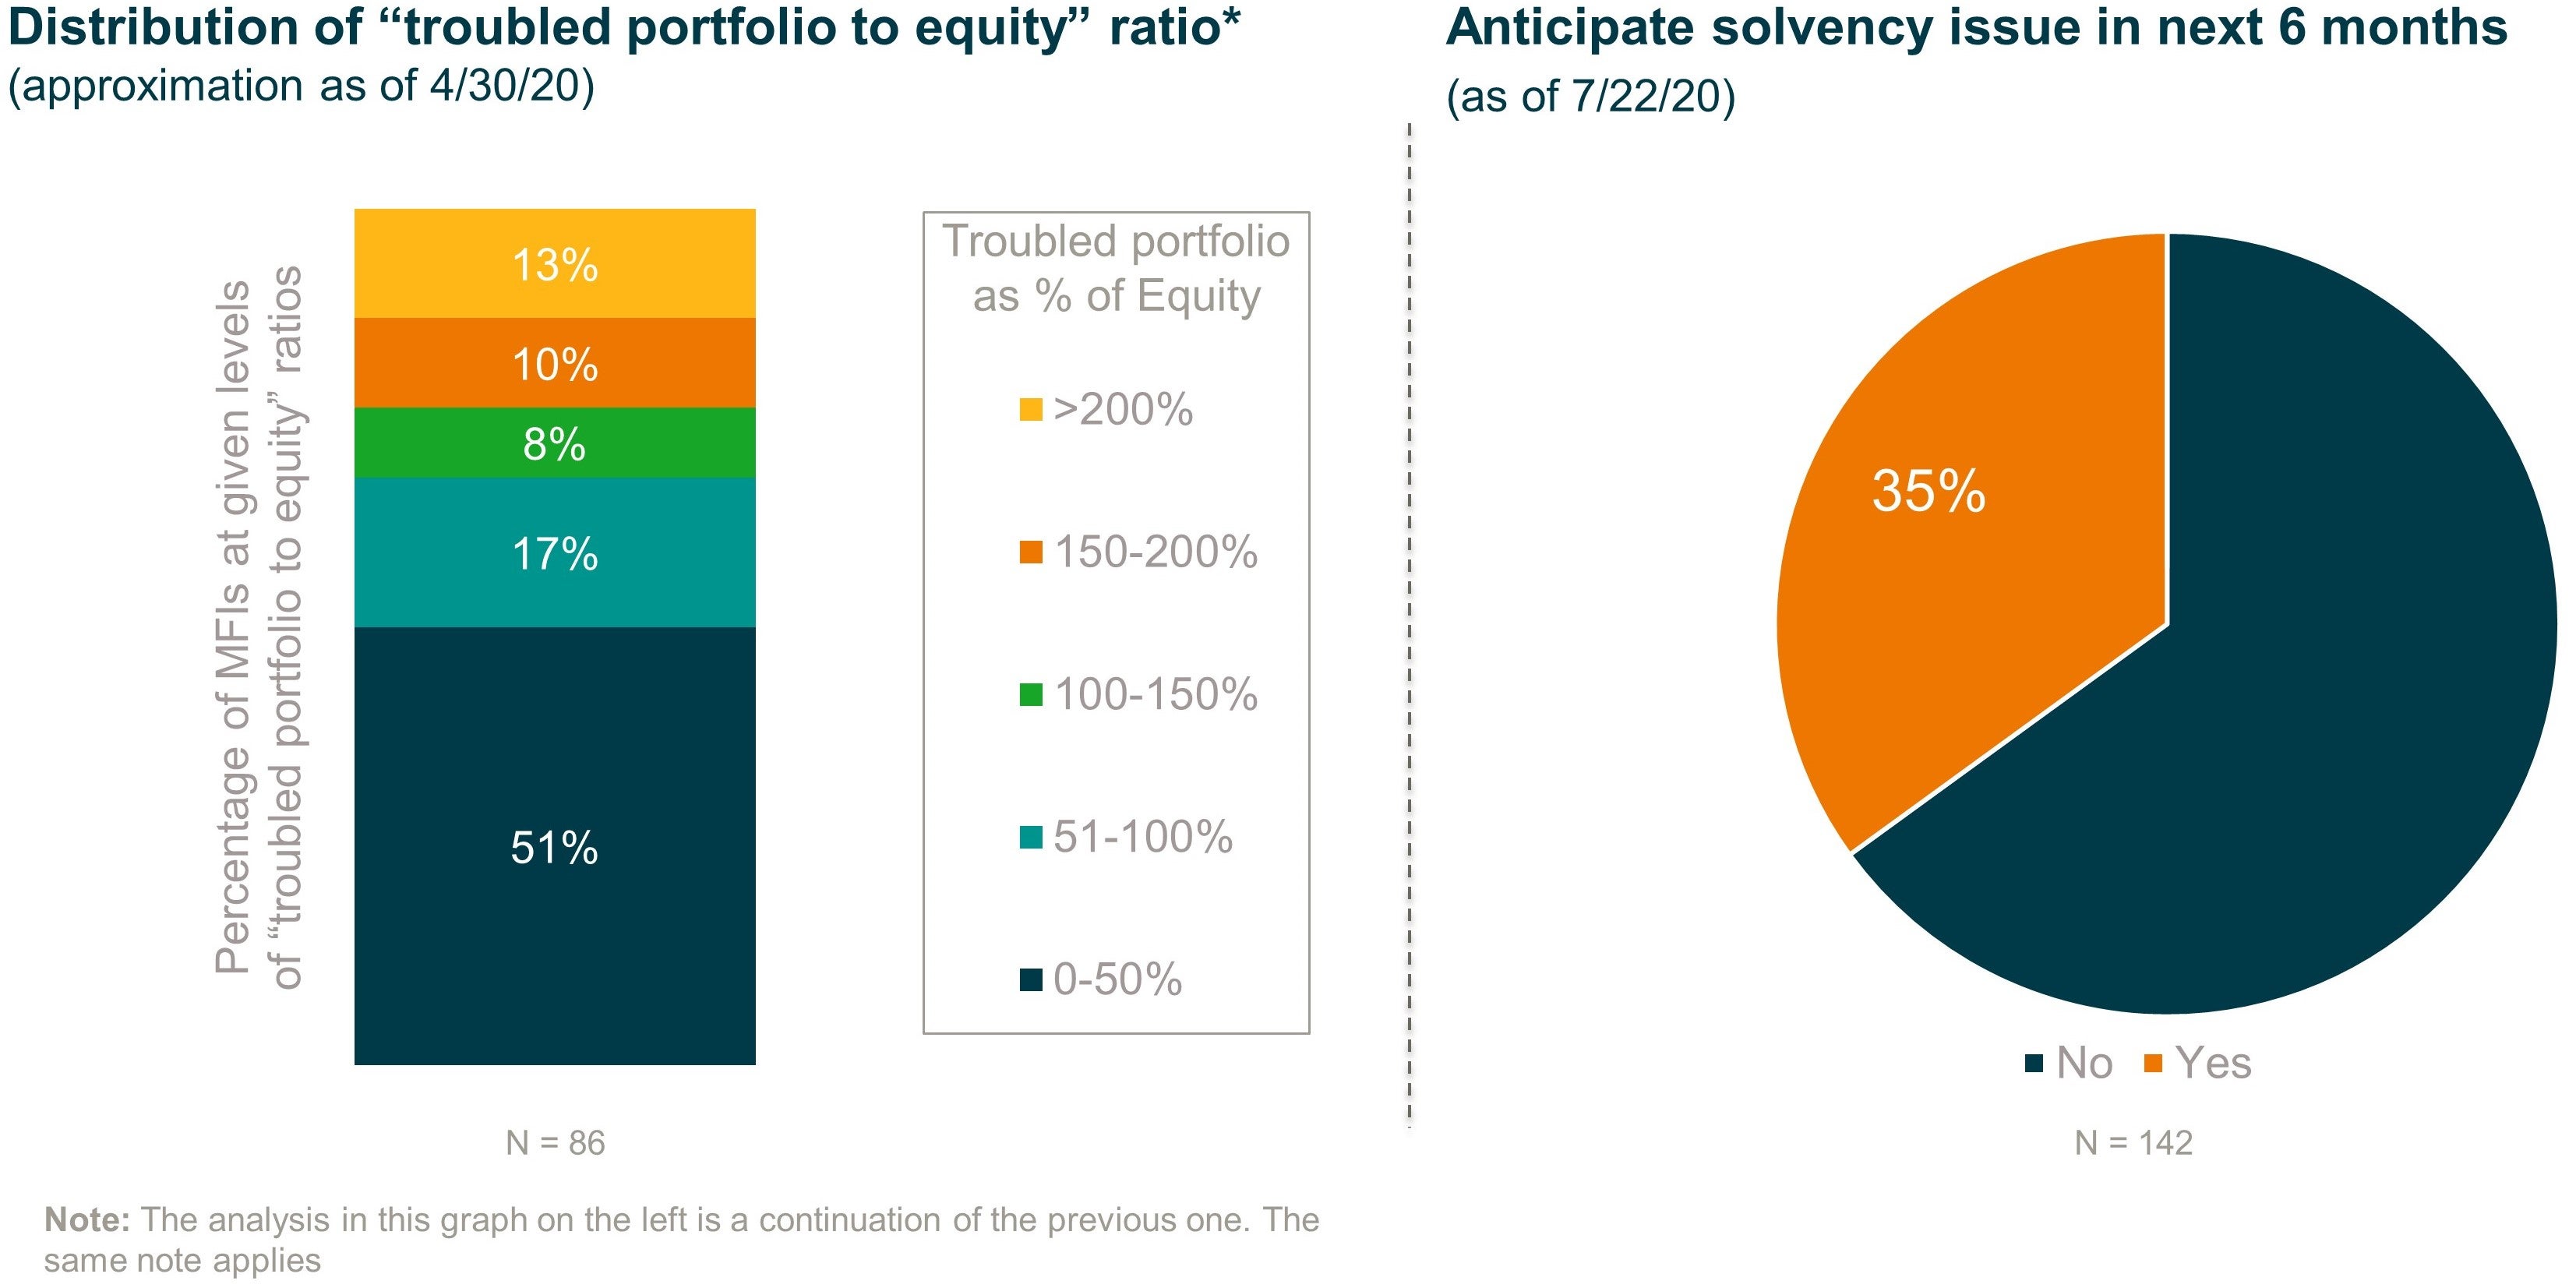 Percentage of microfinance providers anticipating solvency issues in next six months, along with distribution of troubled portfolio to equity ratio